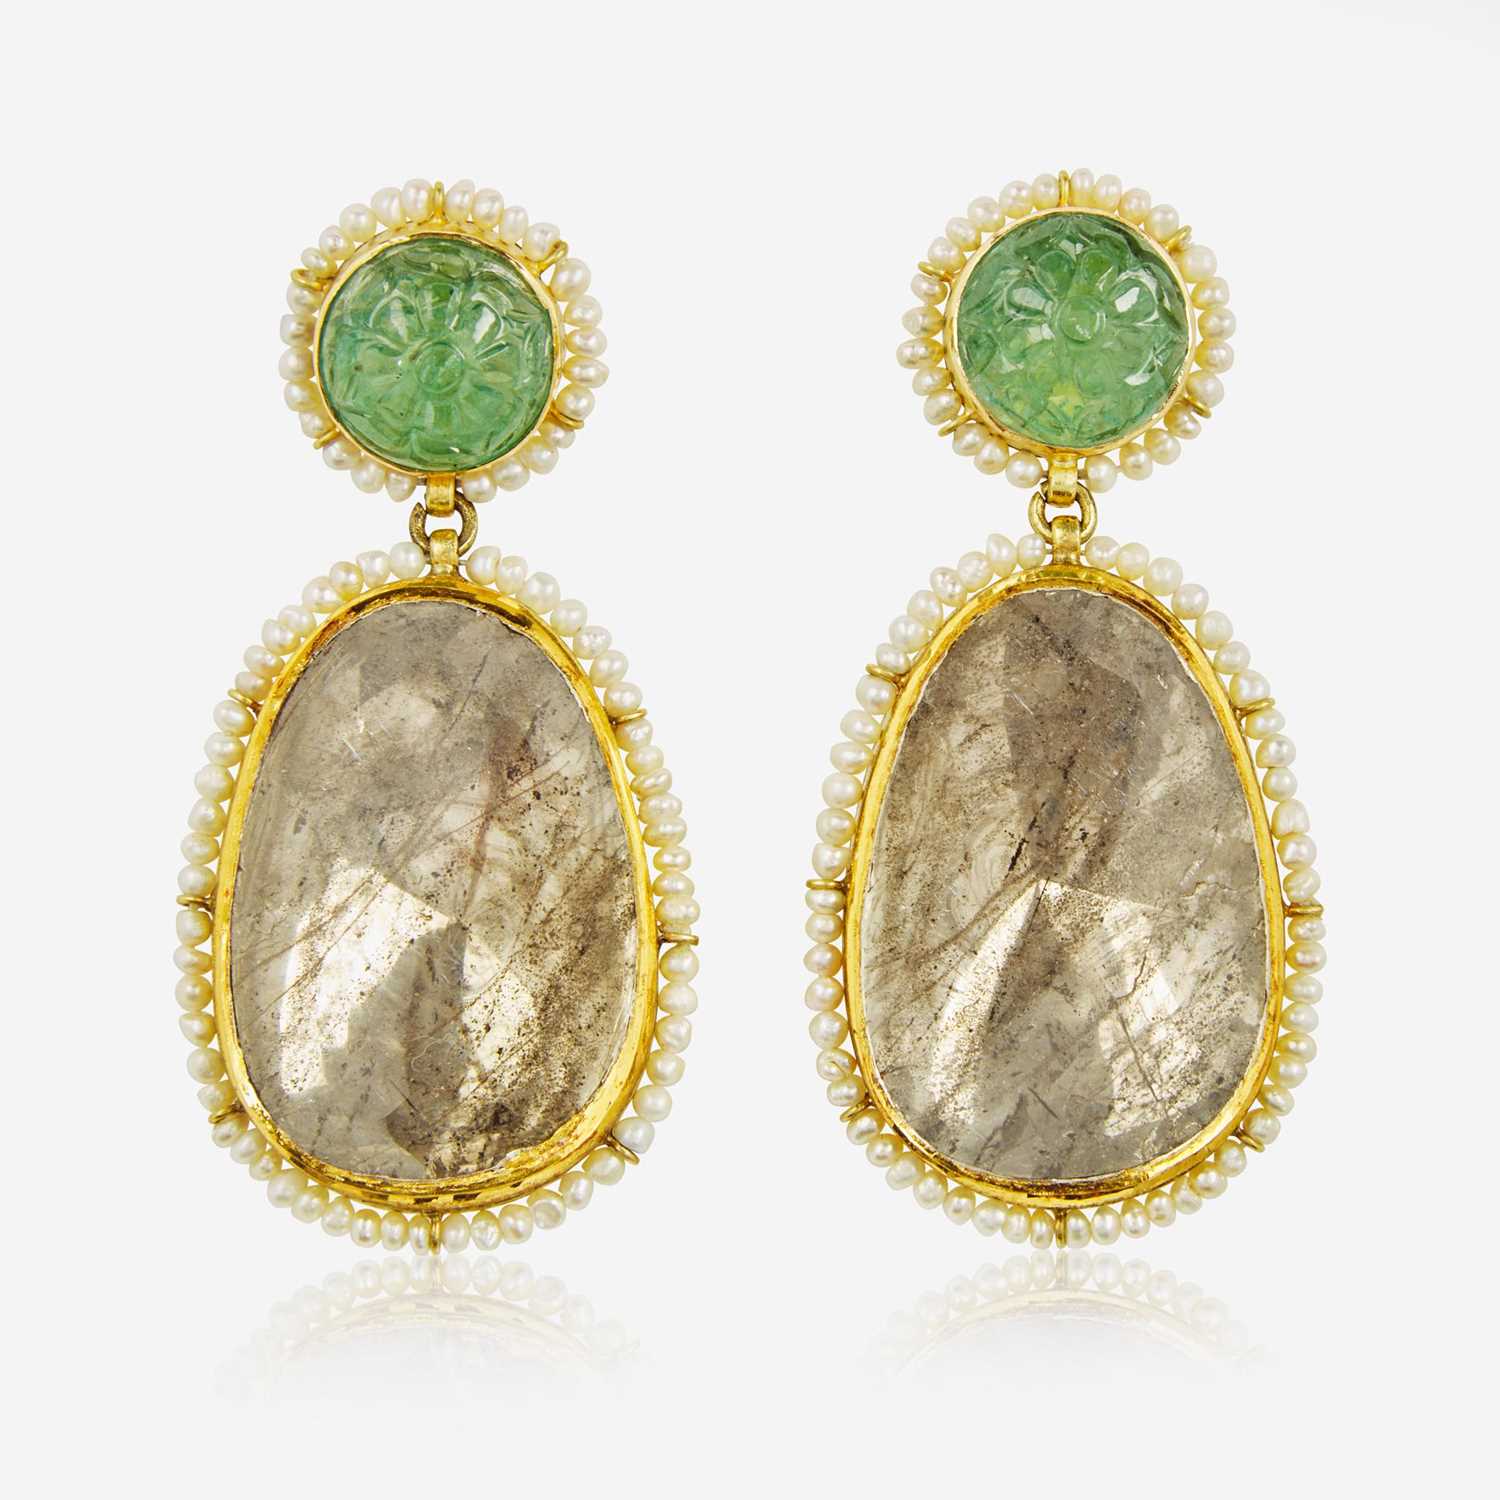 Lot 29 - A Pair of 18K Yellow Gold, Polki Diamond, Pearl, and Emerald Earrings